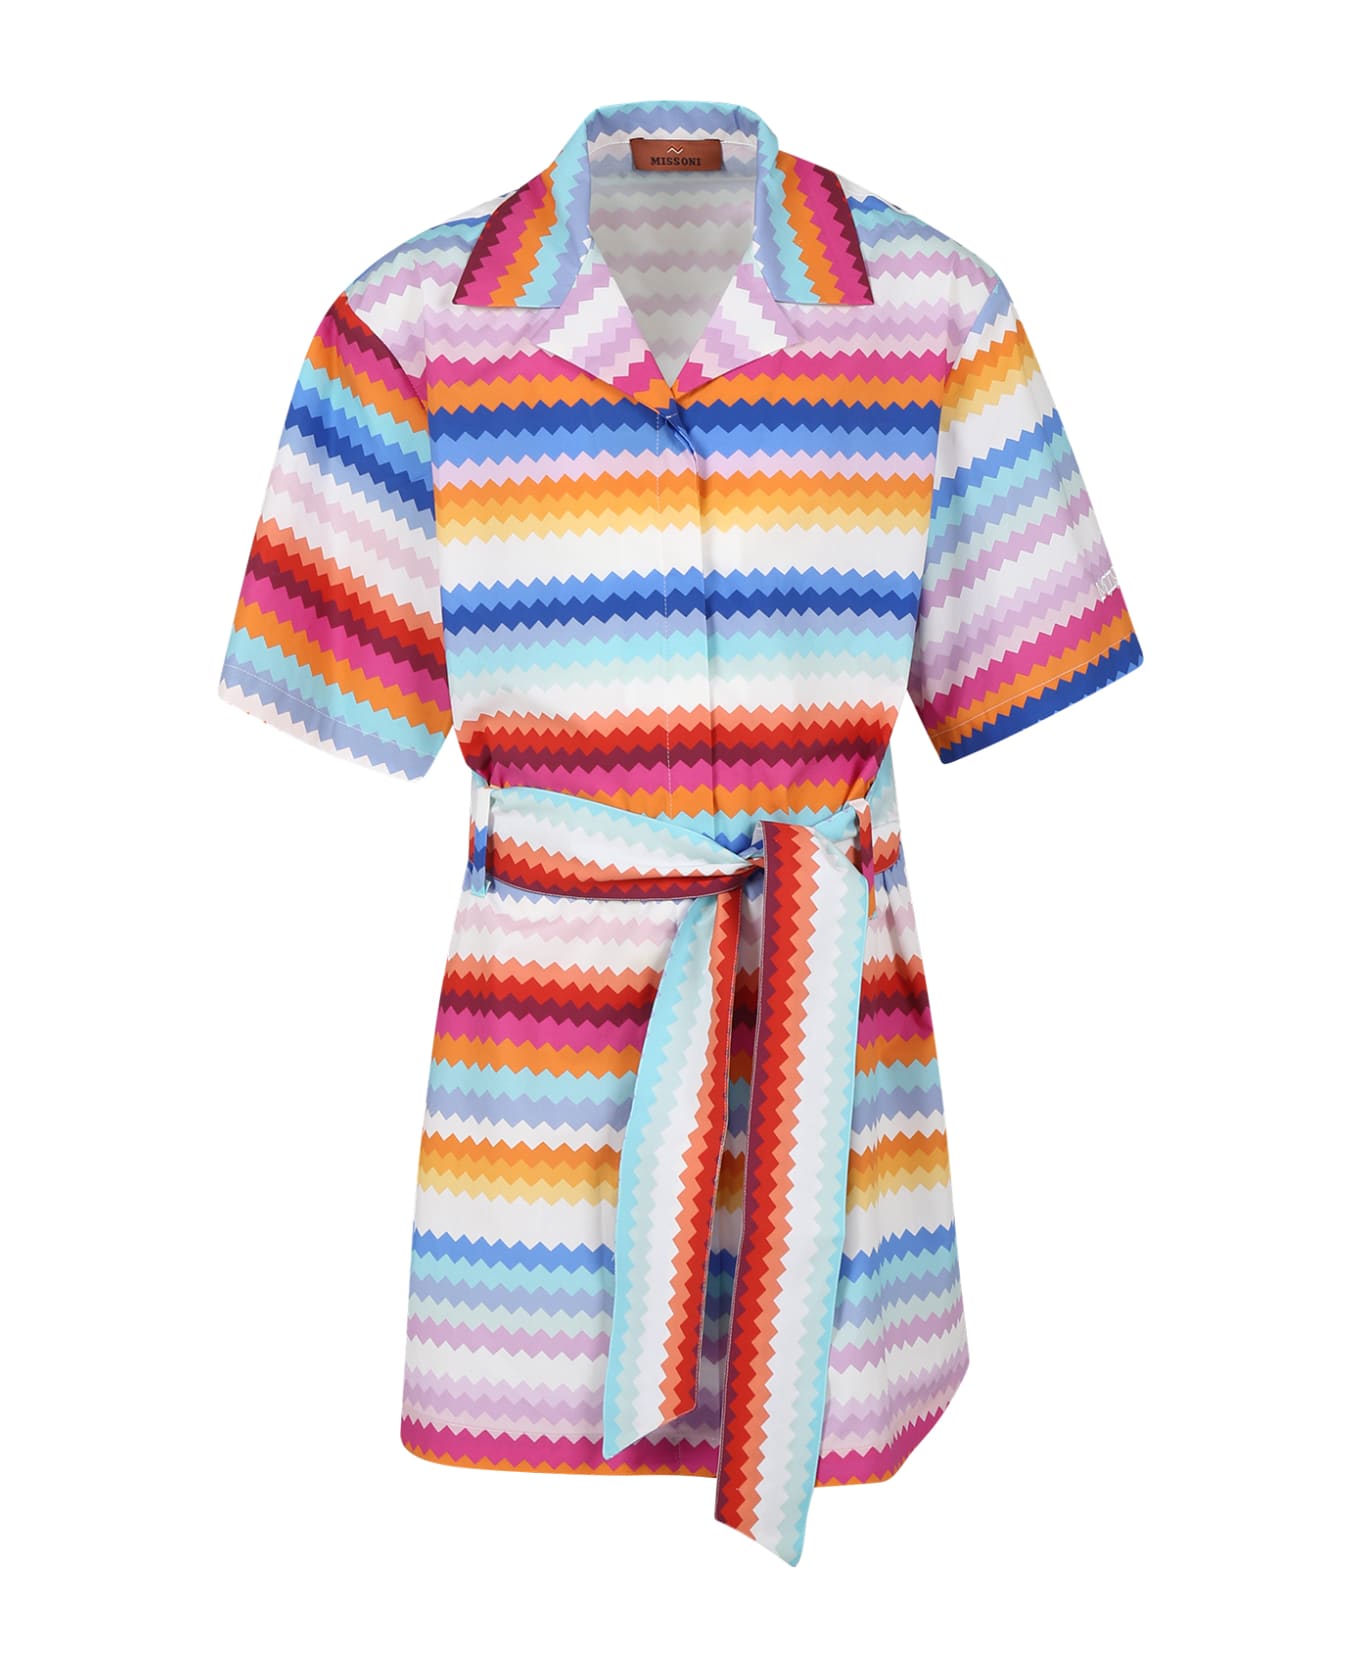 Missoni White Dress For Girl With Chevron Pattern - Multicolor